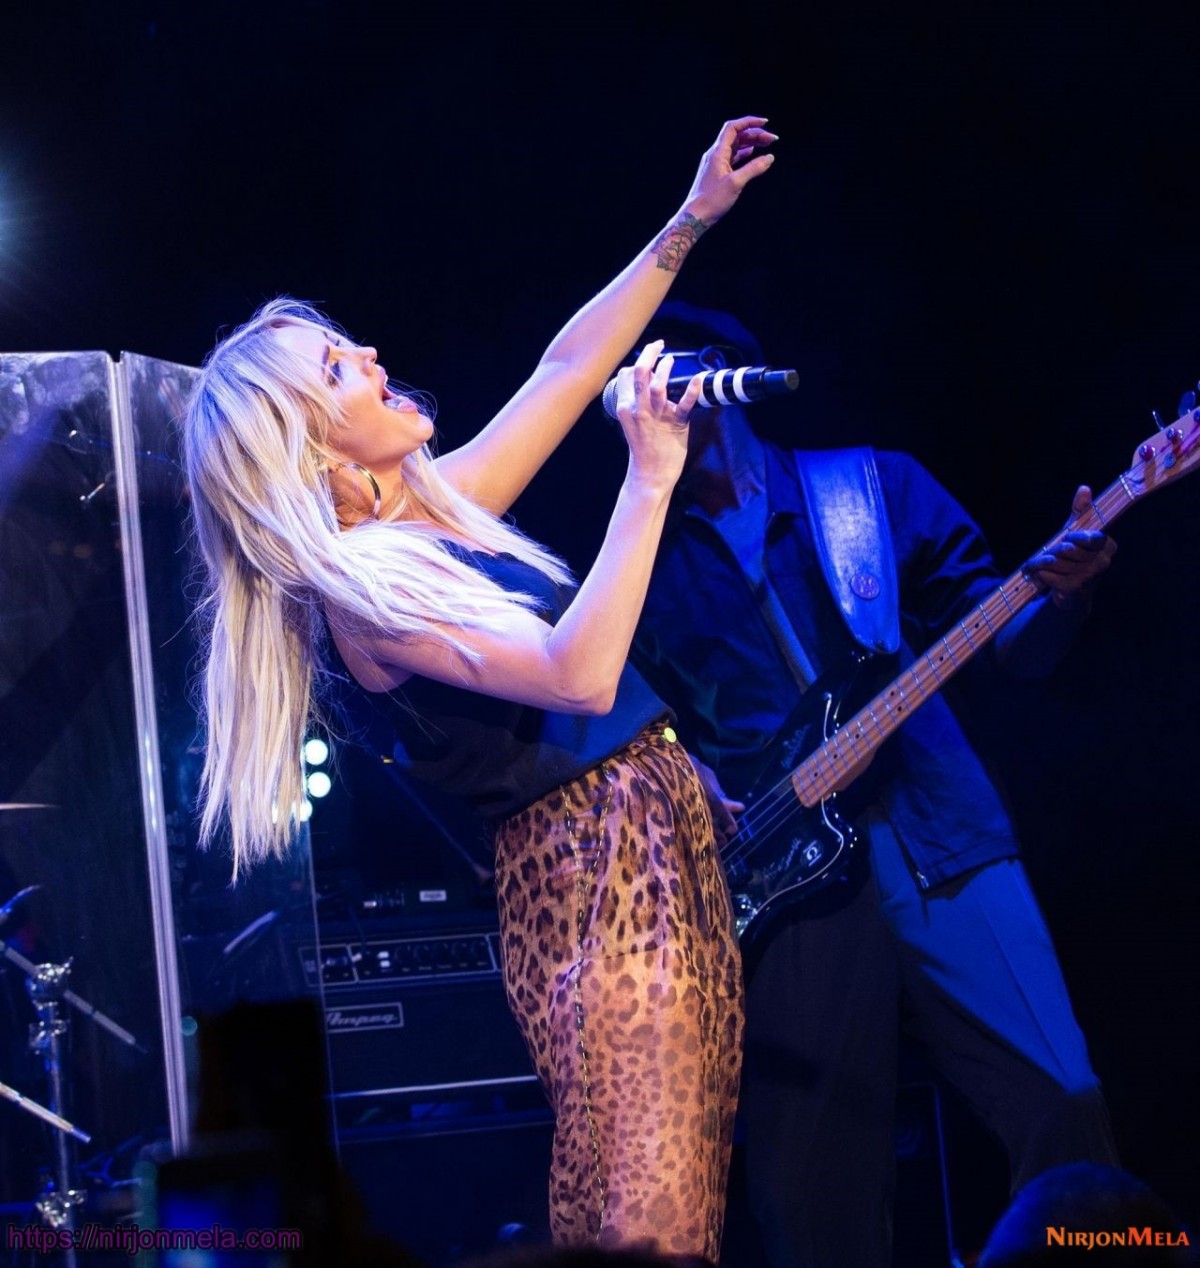 ashlee-simpson-and-evan-ross-performs-in-concert-in-nyc-01-07-2019-0.jpg